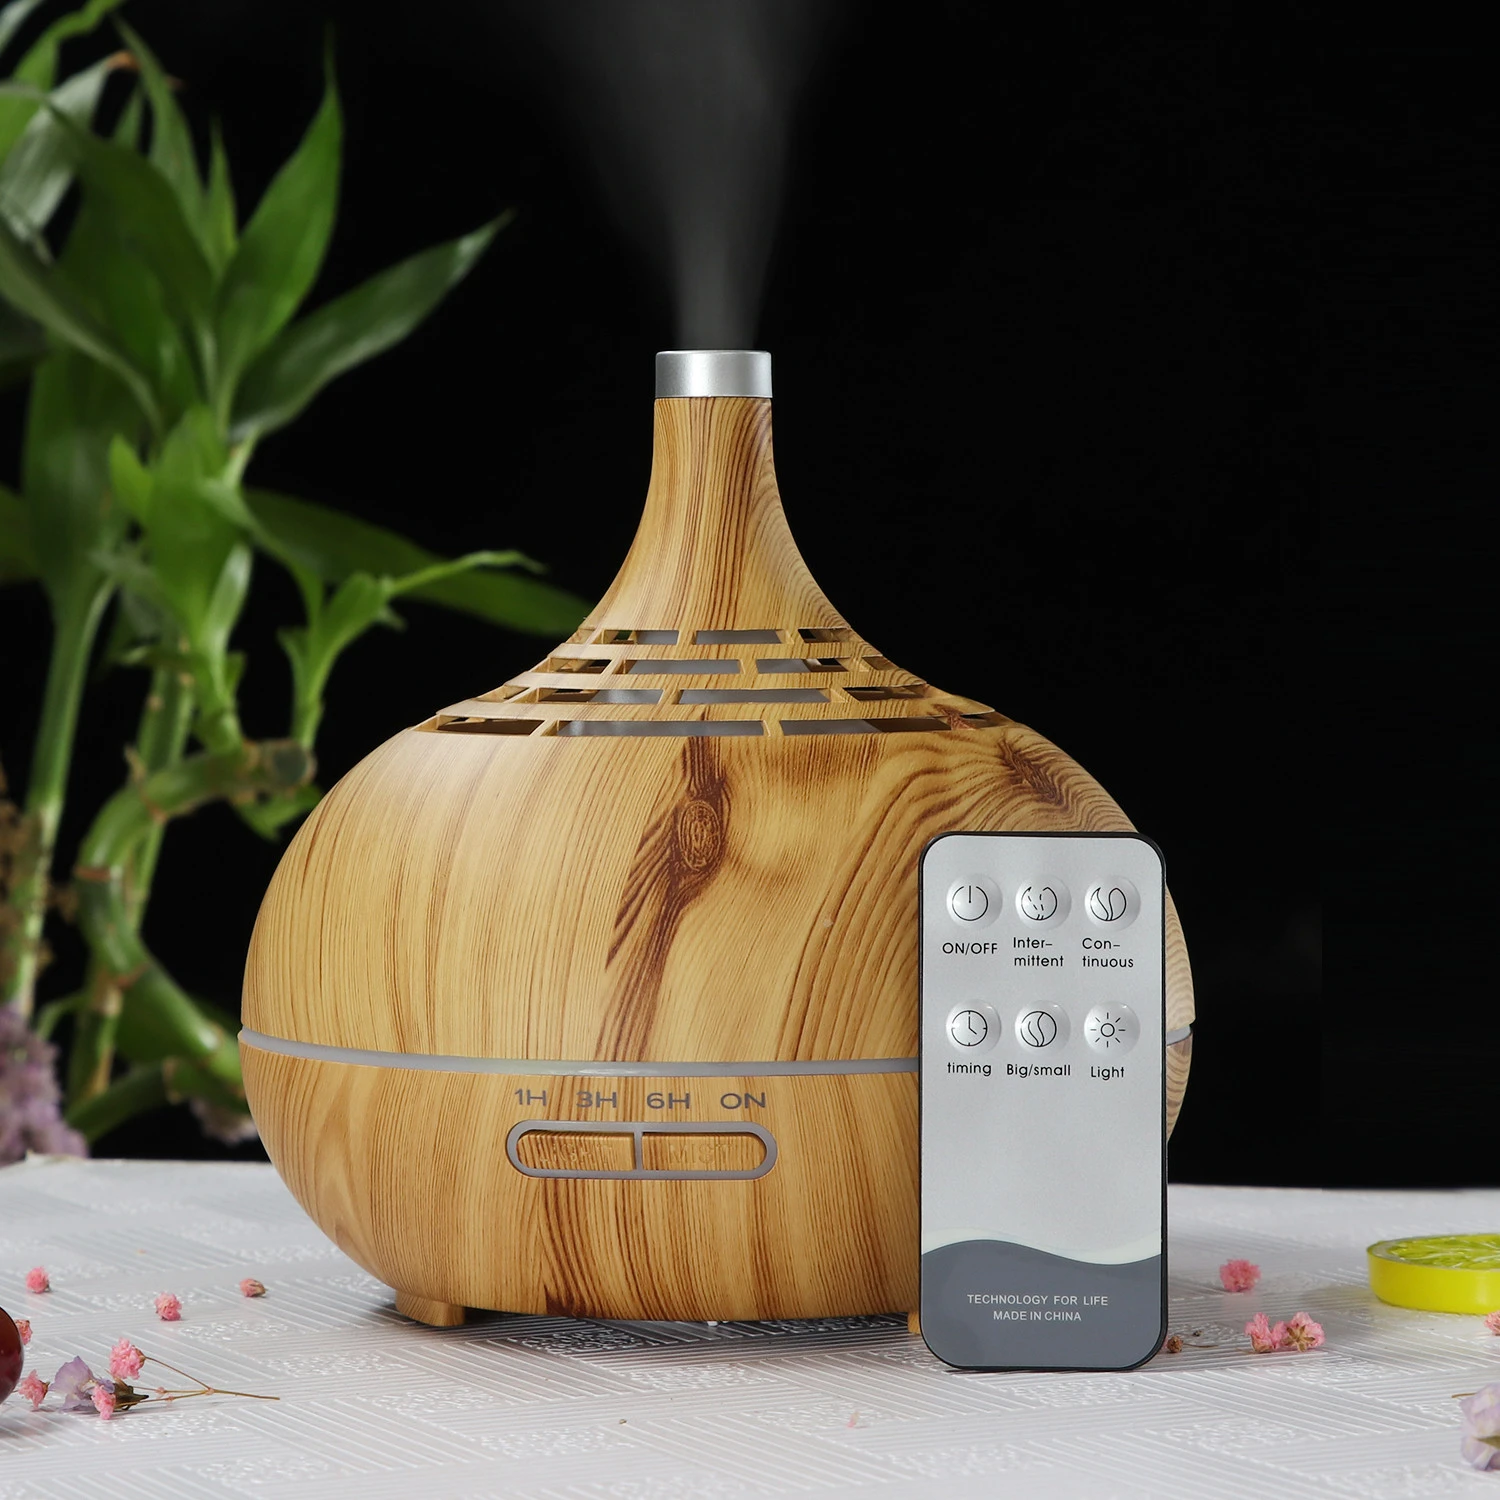 Home Perfume LED 7 Colors Night Light Ultrasonic Home Office Air essential Oil  Bamboo Real Wood Aroma Diffuser Humidifier